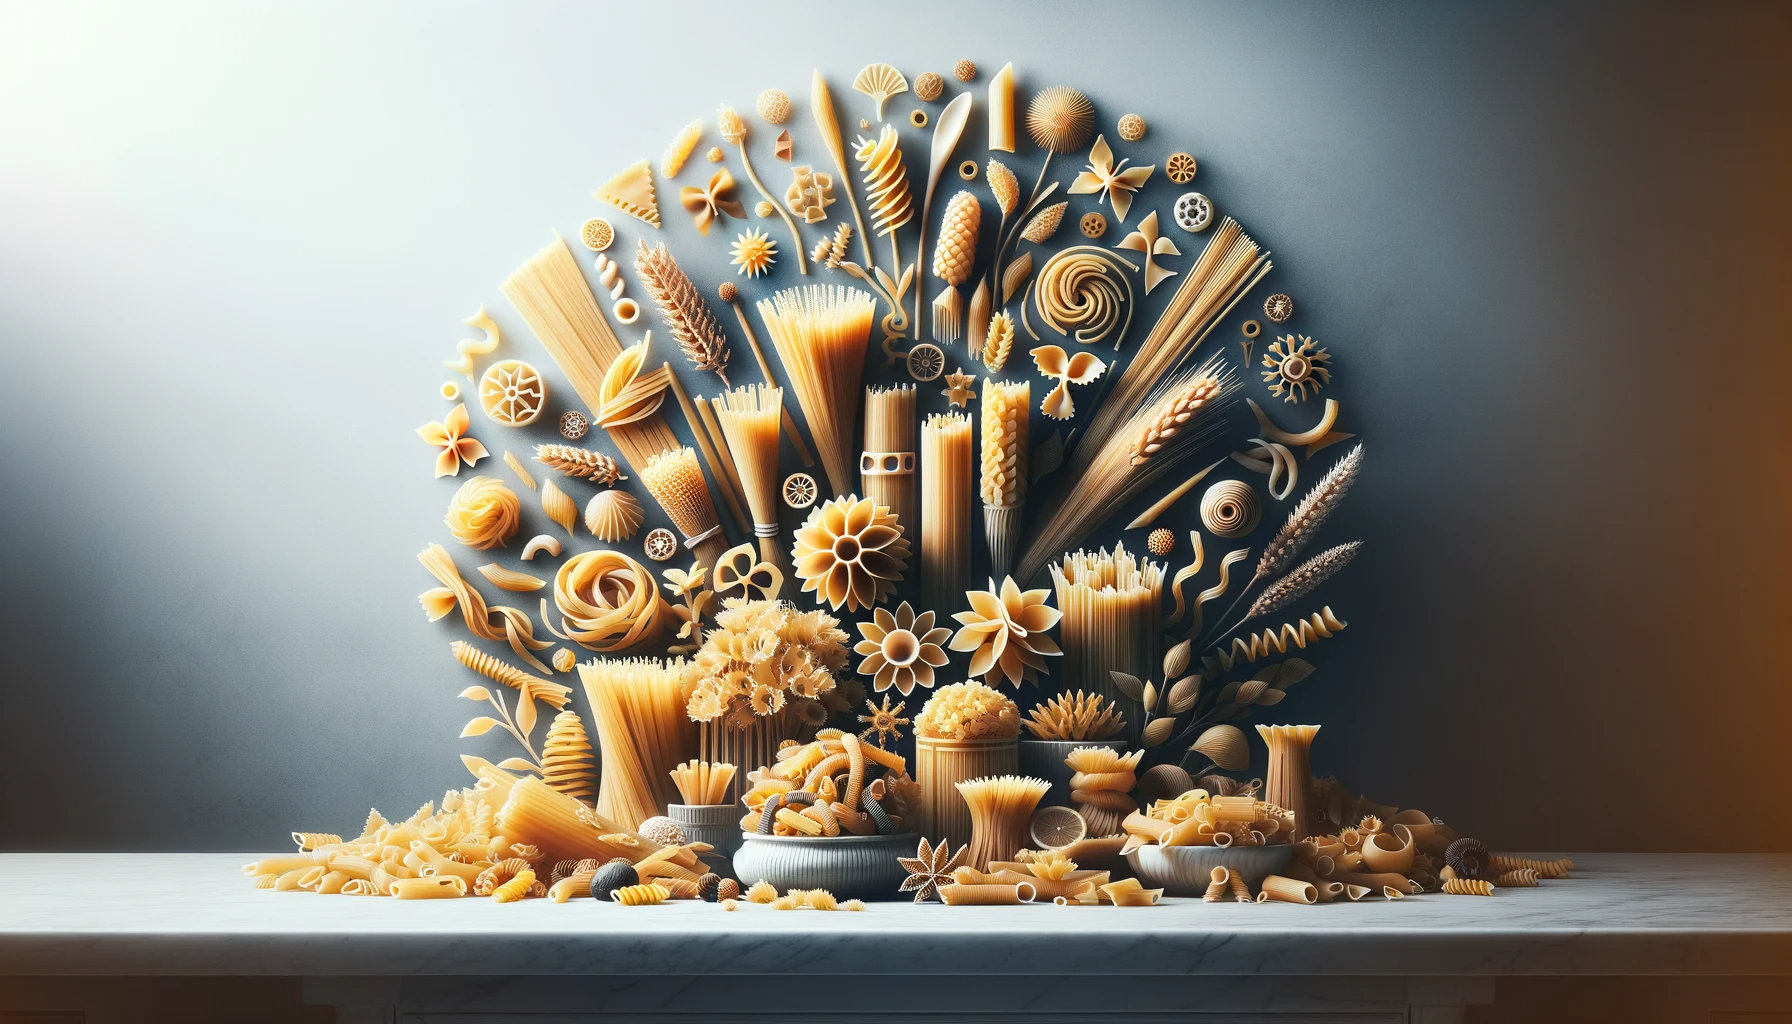 A wide banner image featuring an assortment of pasta types - spaghetti, penne, fusilli, and farfalle - artistically arranged on an elegant and minimalistic background, embodying the gourmet essence of pasta cuisine